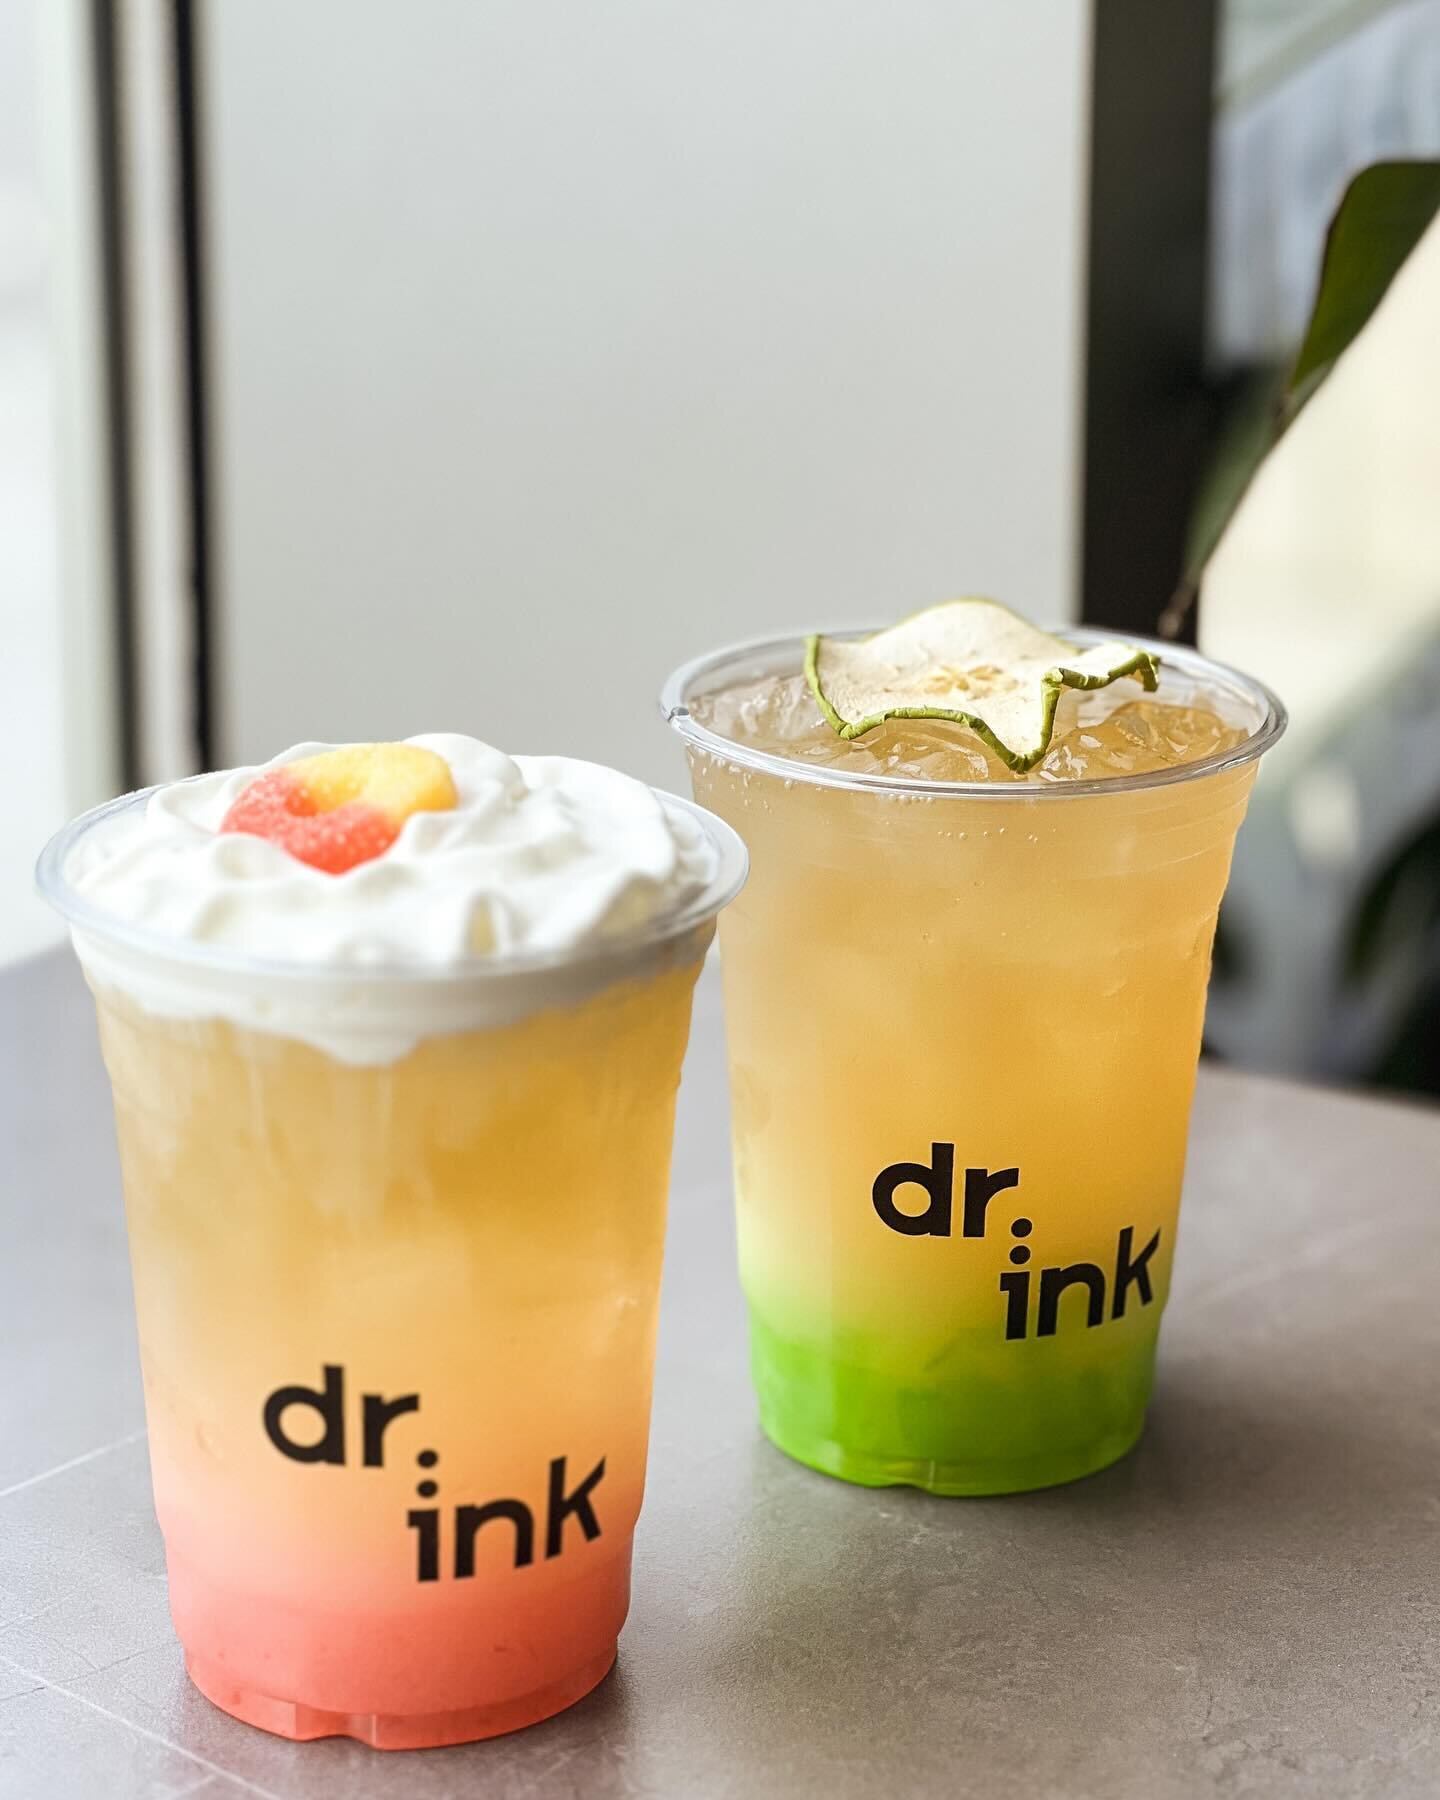 ⏰Last Call for Seasonal Sips! ⏰

Our Peach Oolong🍑 and Green Apple🍏 drinks are saying their goodbyes as our current seasonal menu comes to a close. These flavors won't be back for a while, so come grab a taste of the season before they disappear! ?